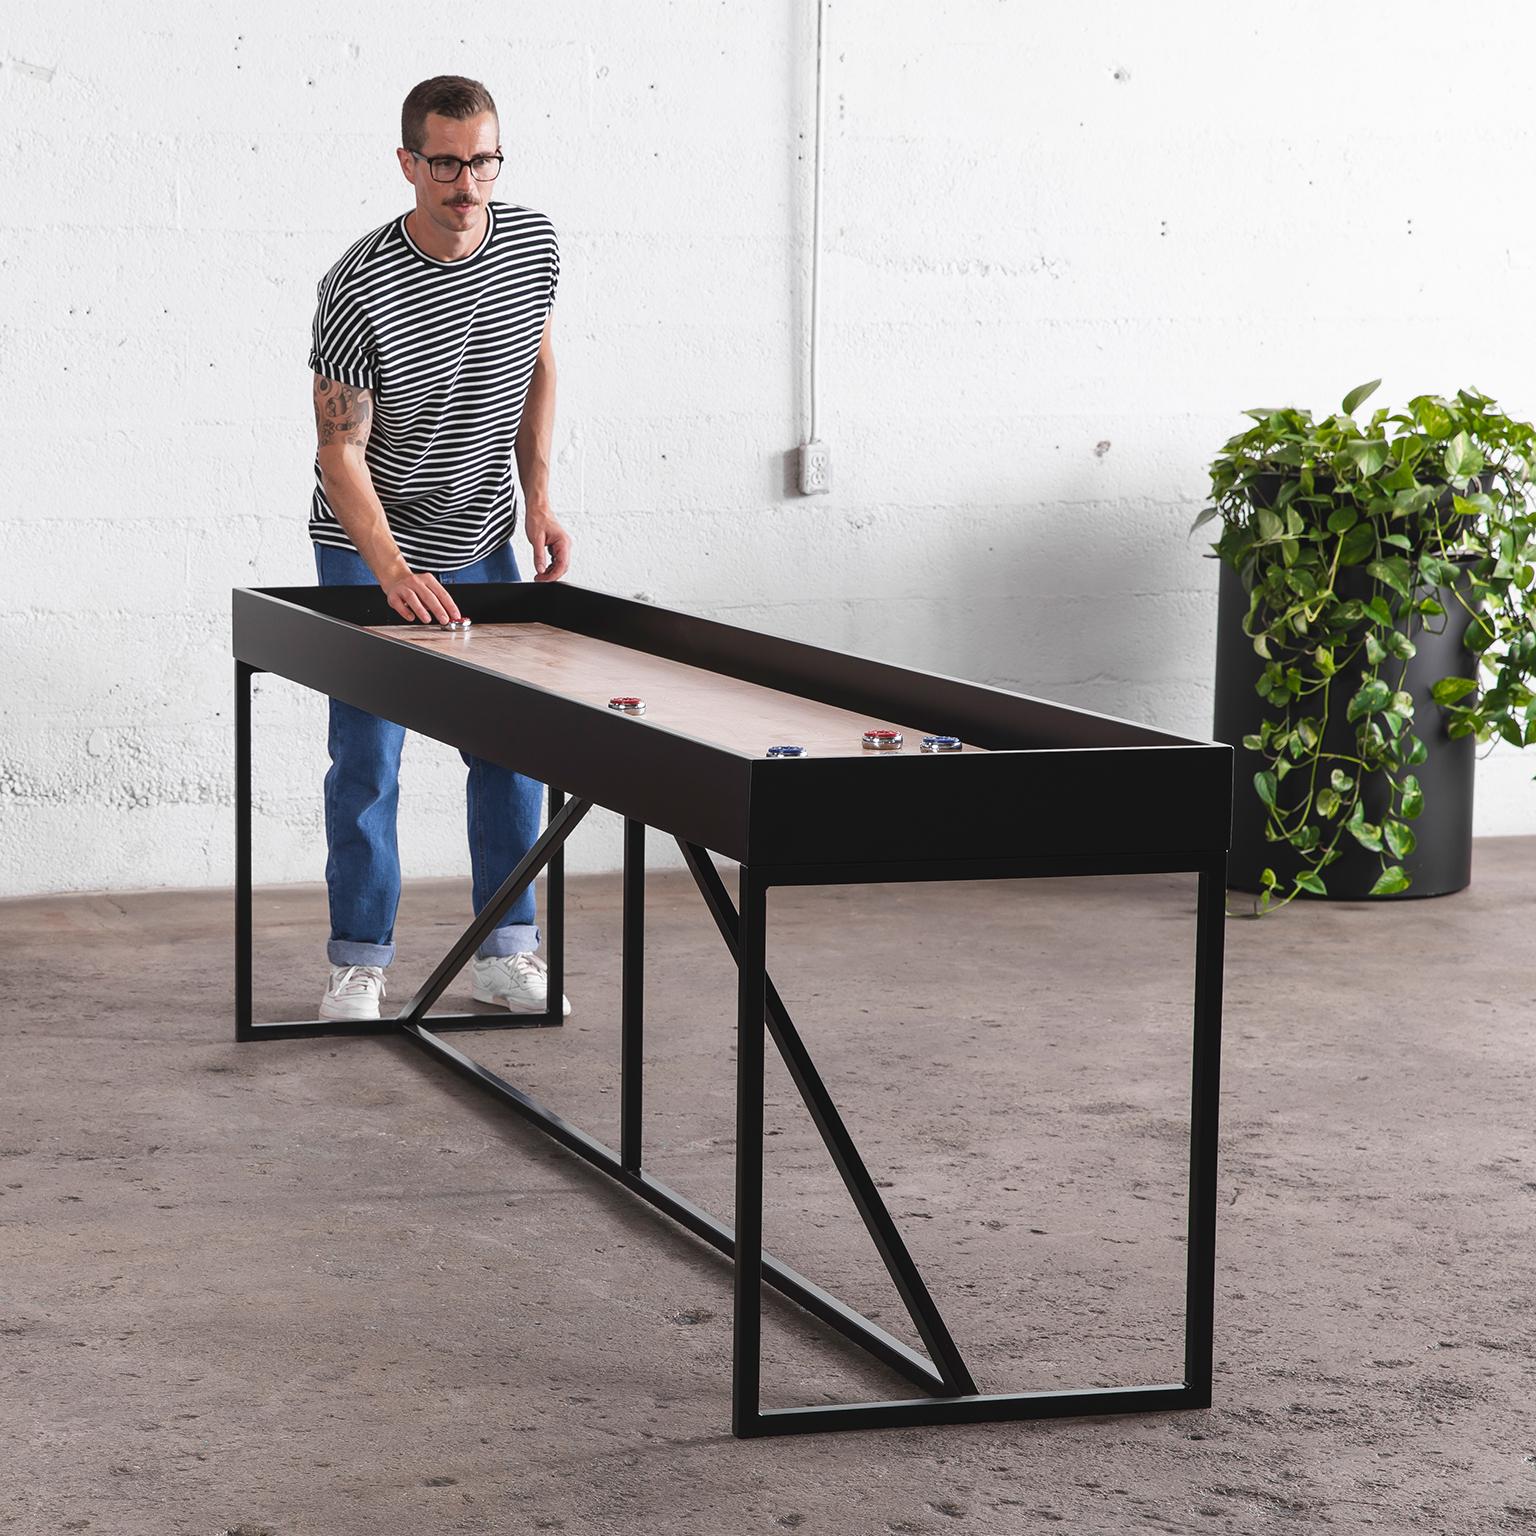 Our modern wooden shuffleboard gives an updated look to a classic game. Each shuffleboard table is made to order in Vancouver, BC. Fitted in a black or white lacquer frame, the natural oak playing surface gives this table distinct character and a